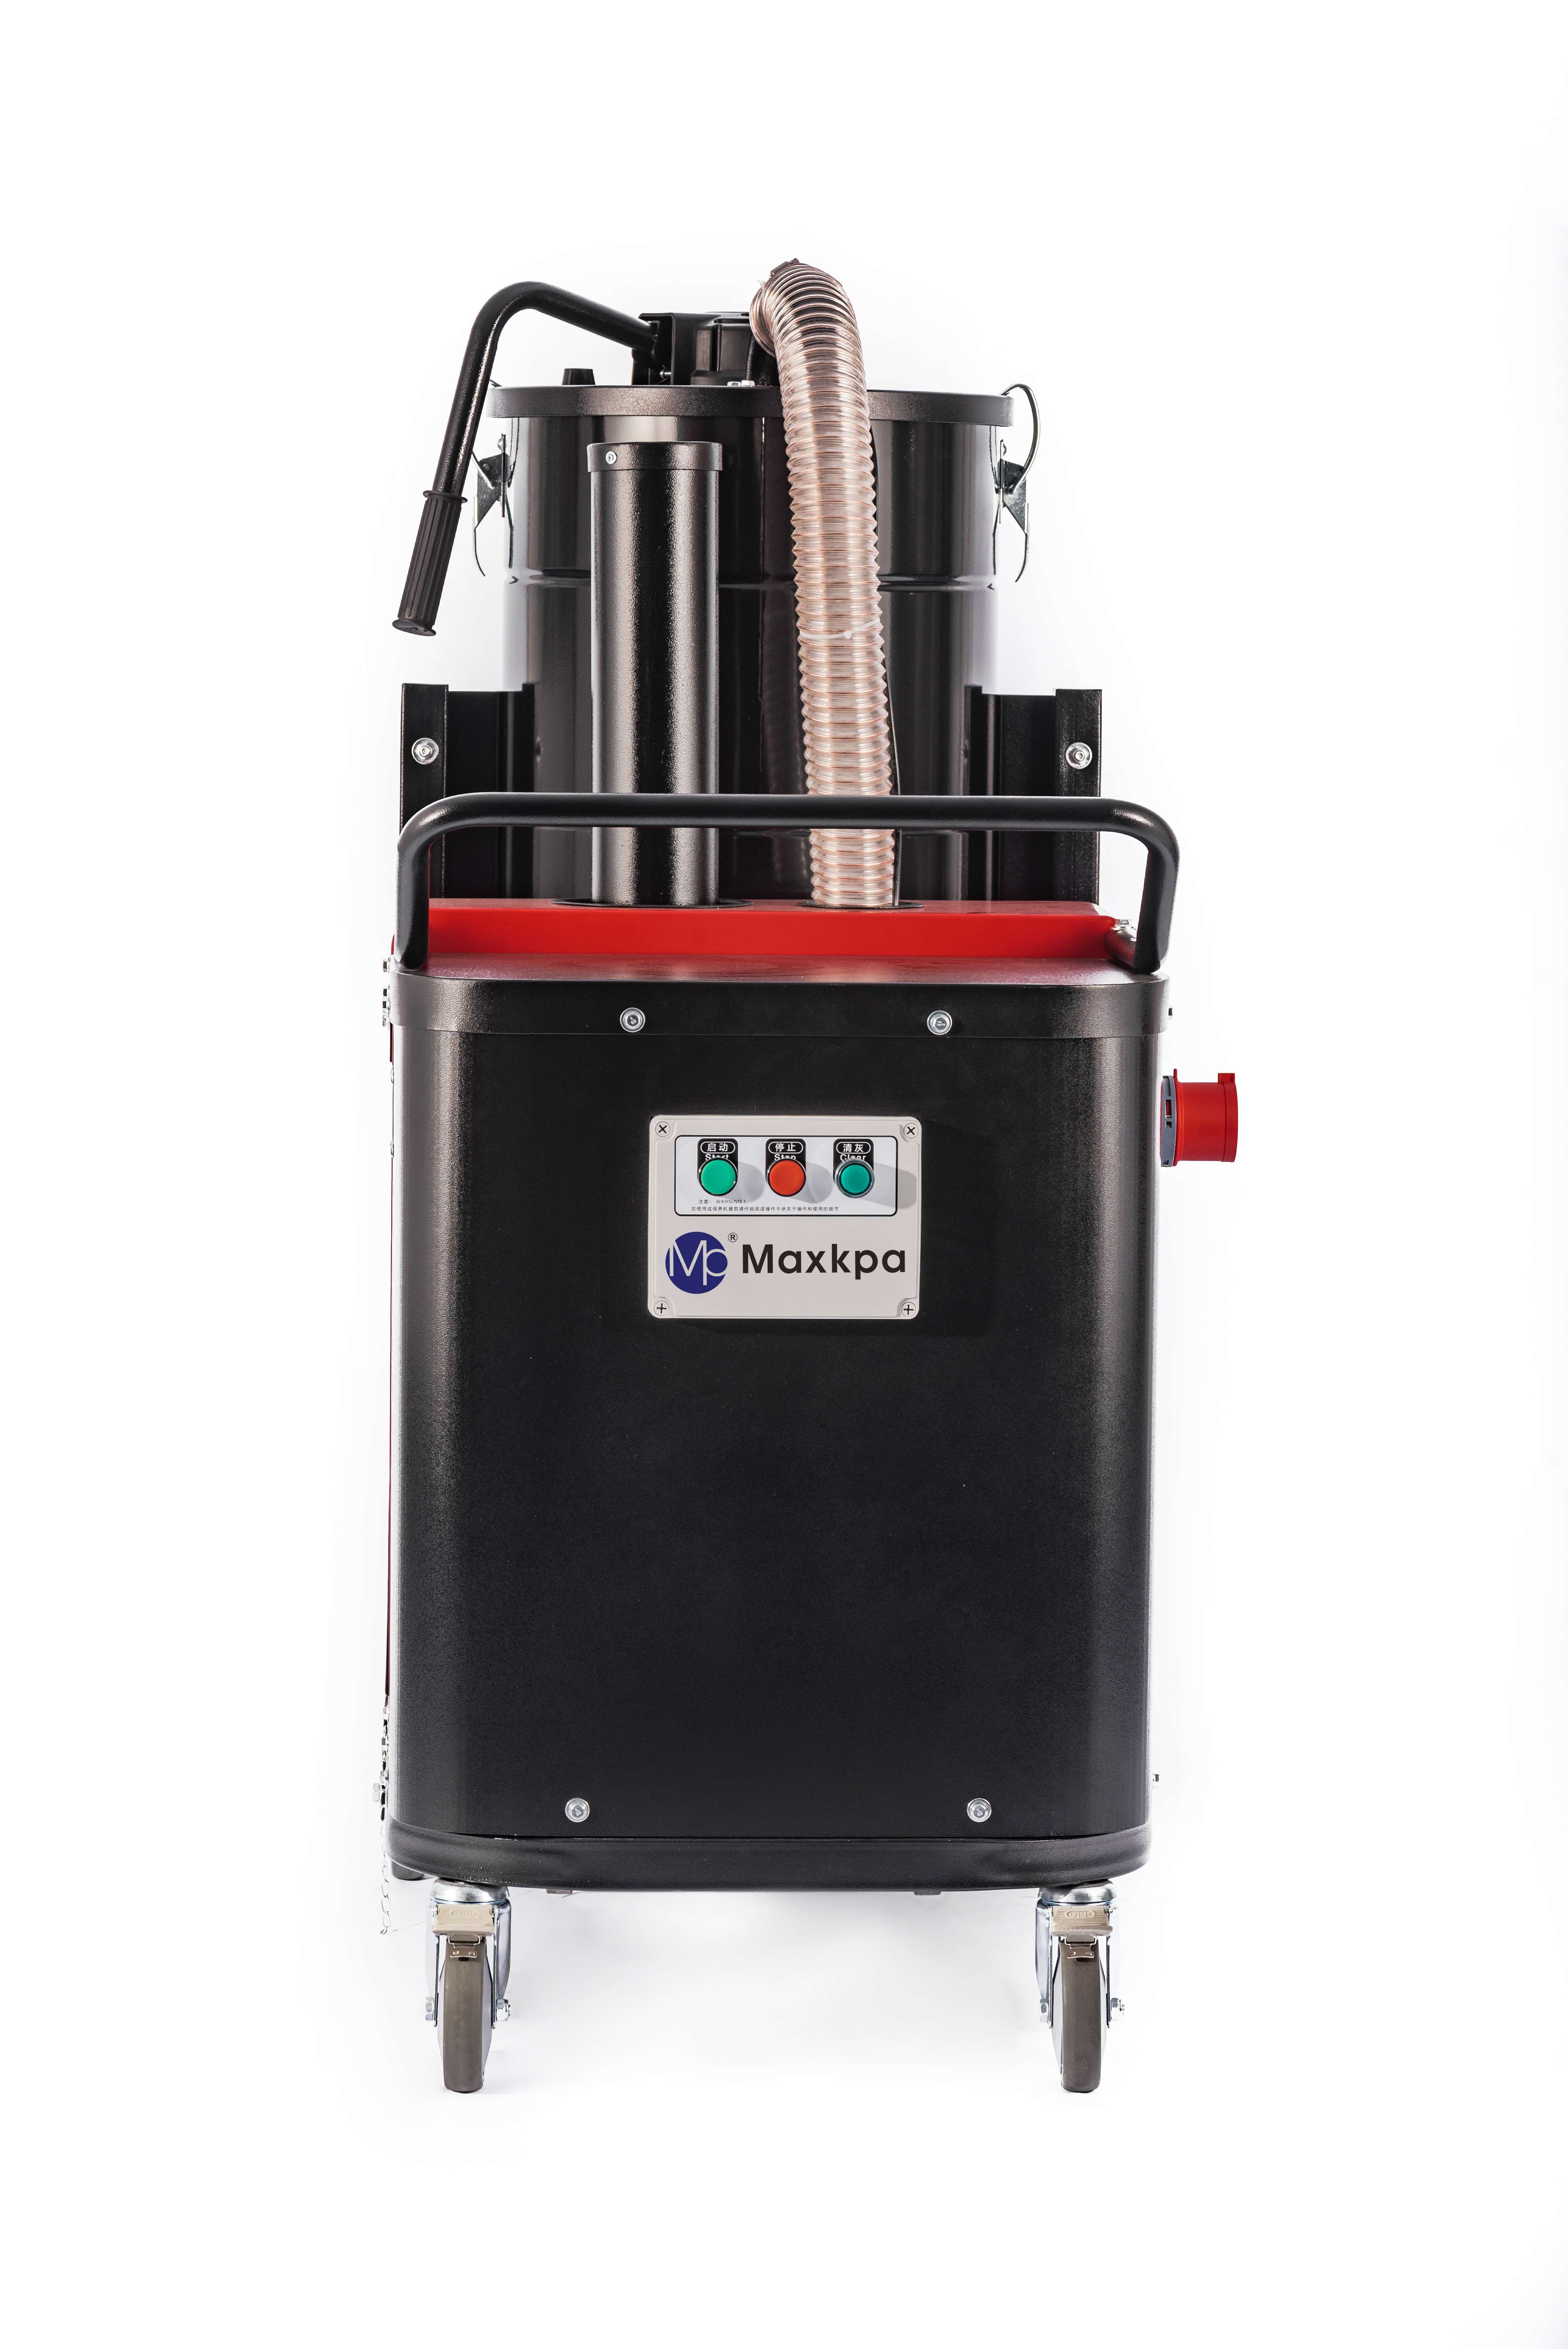 Industrial Vacuum Cleaners Market: A Comprehensive Overview